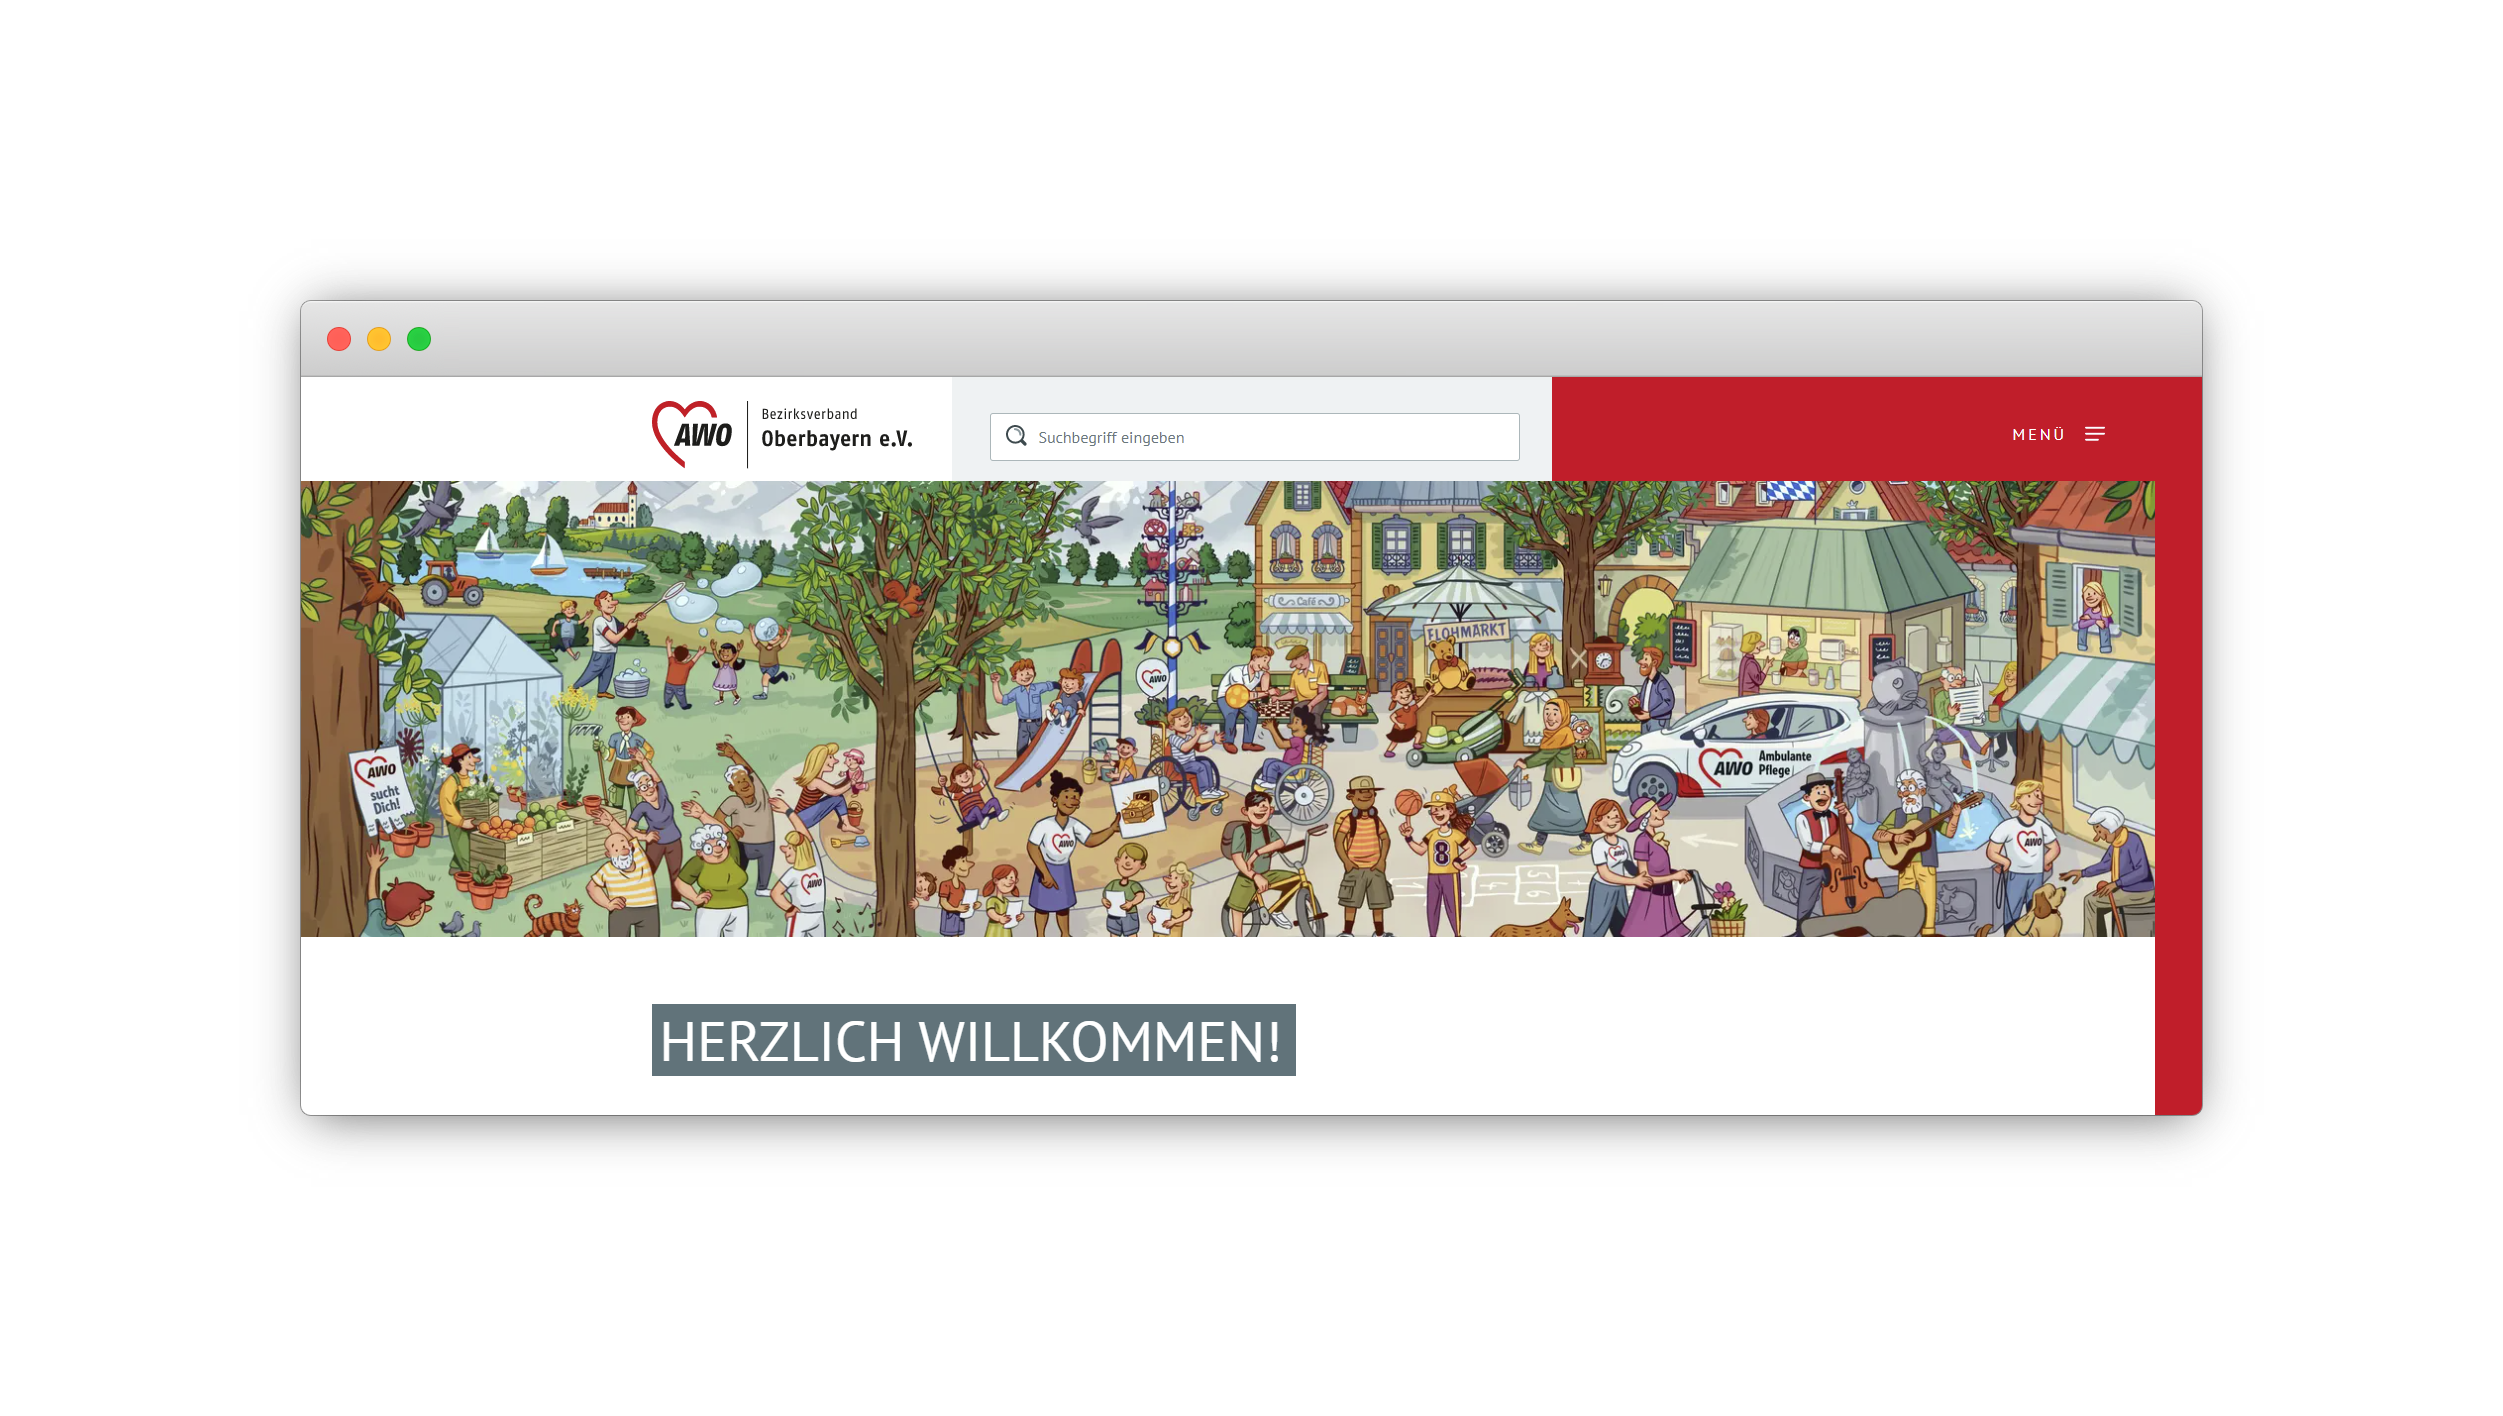 Cover Image for HipSquare launches new website for AWO Oberbayern